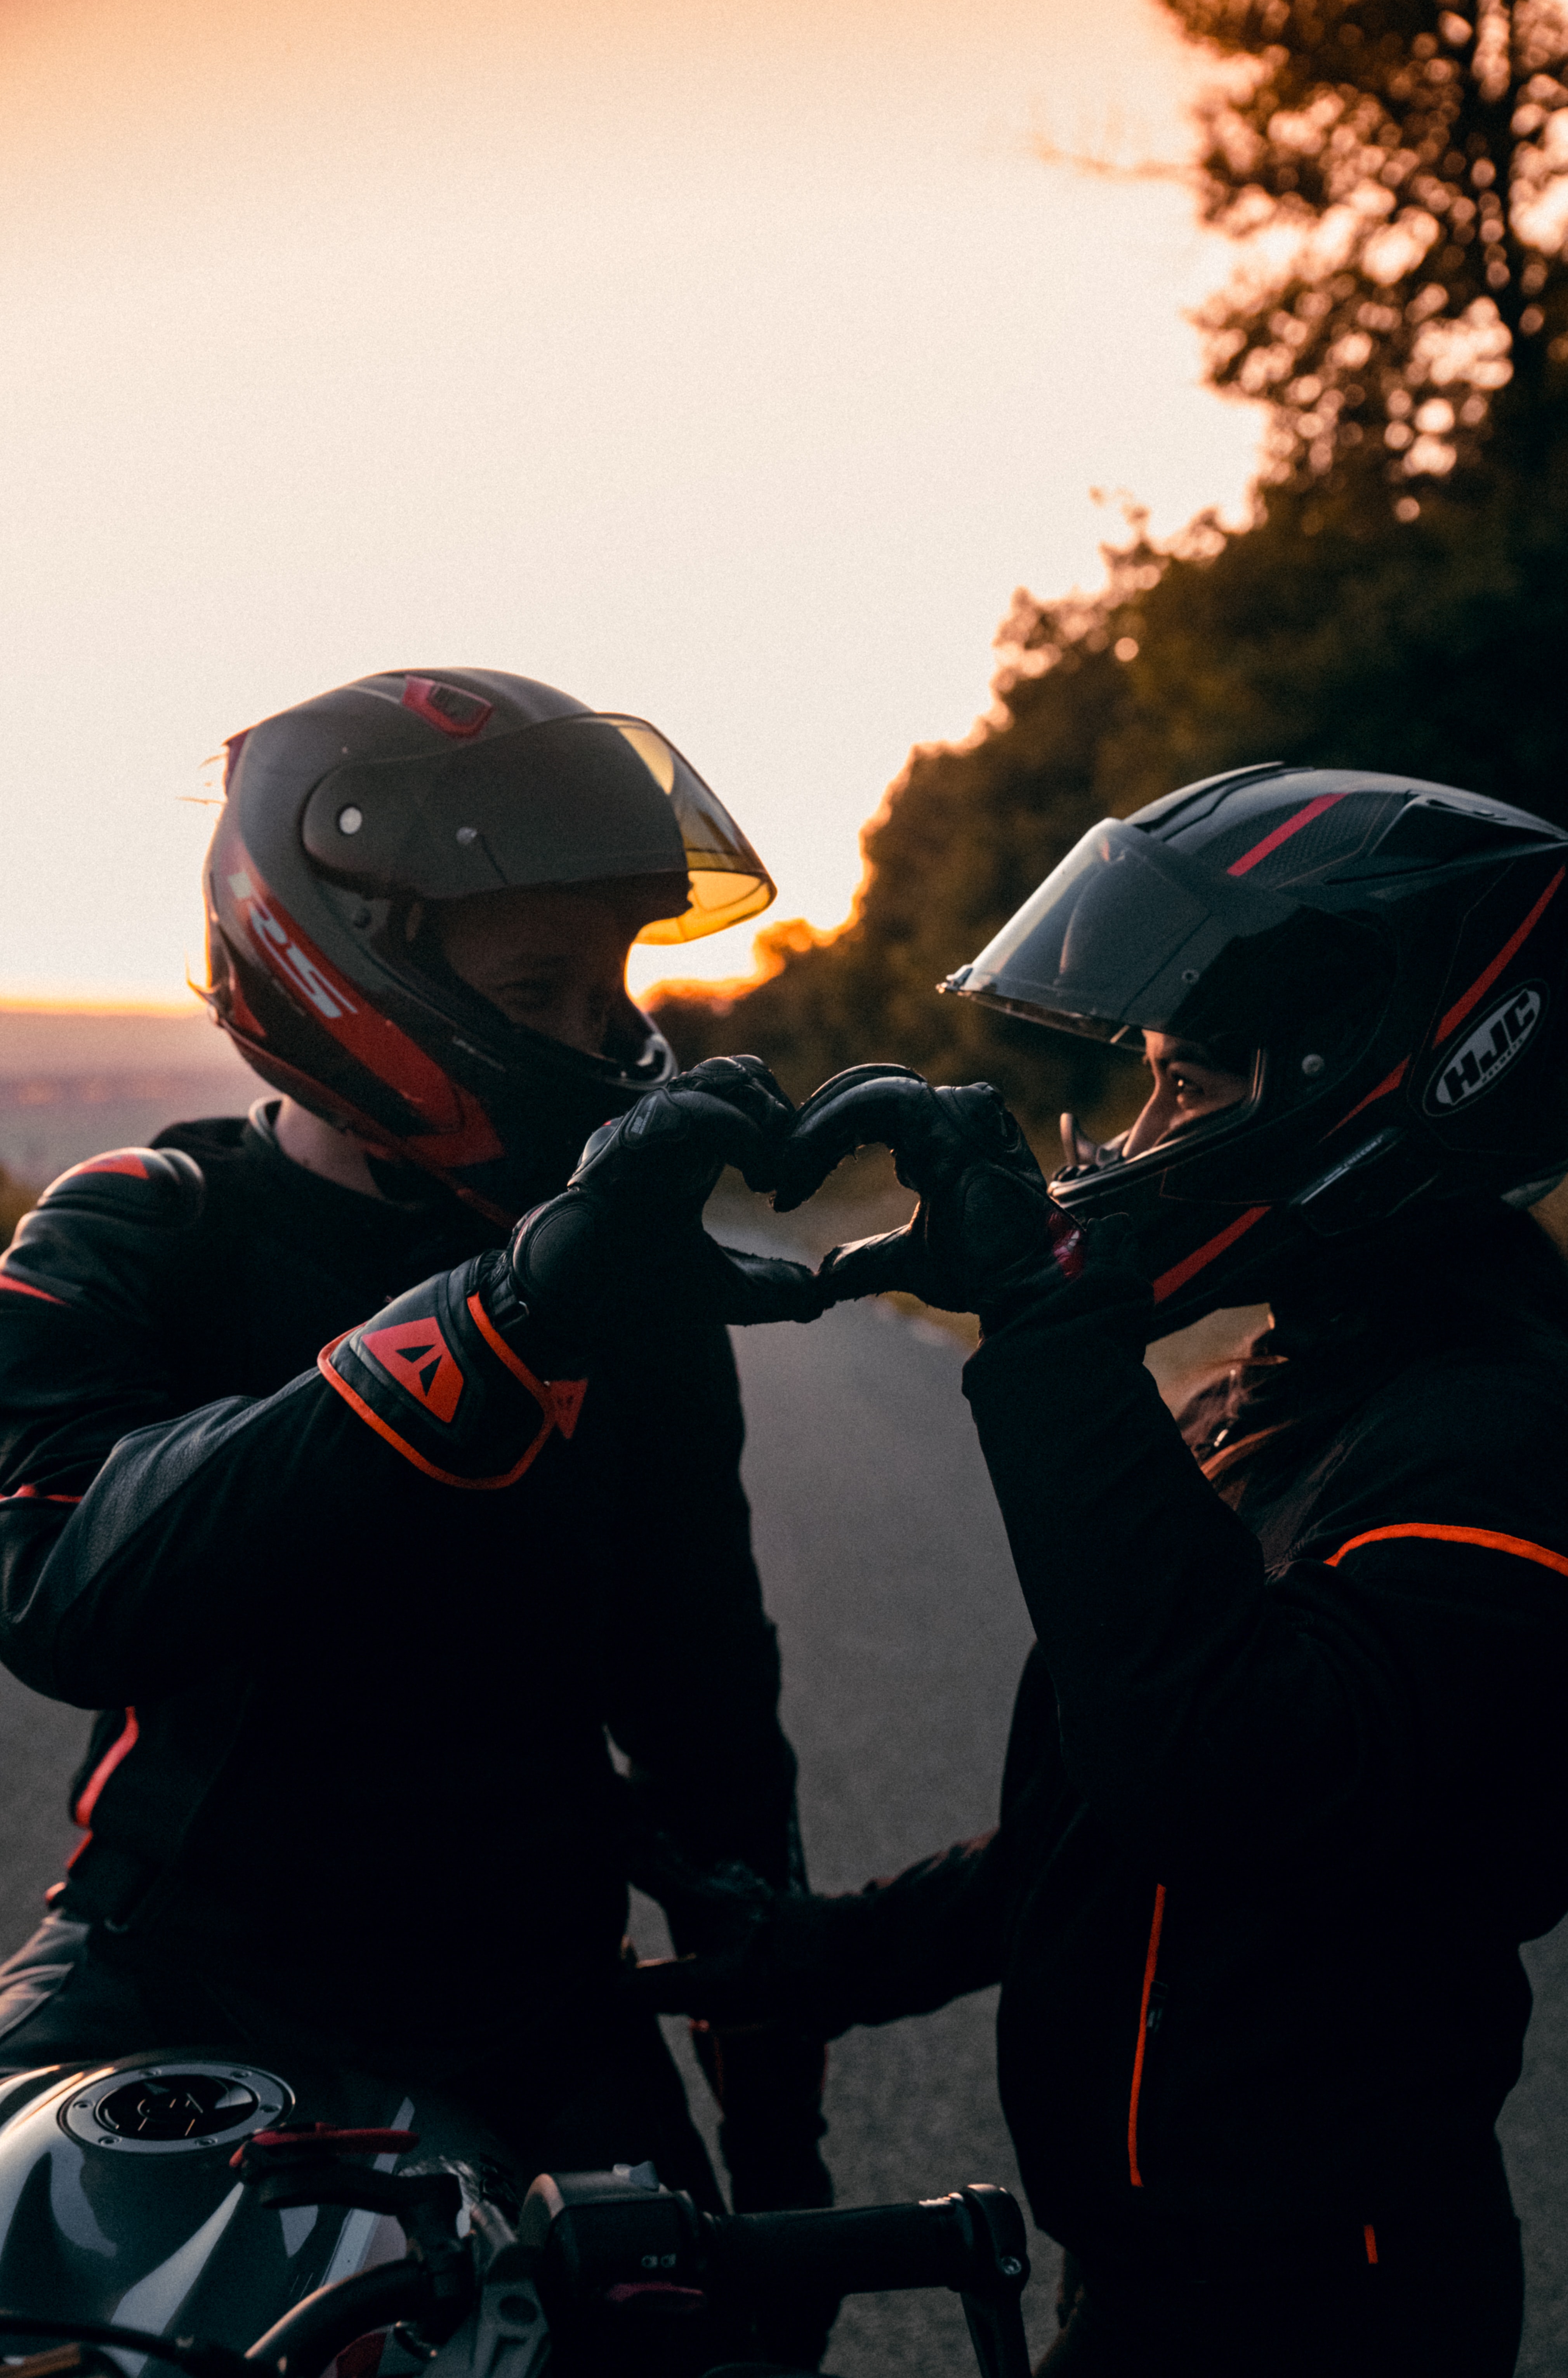 helmet, motorcycles, love, motorcycle, equipment, outfit, motorcyclists